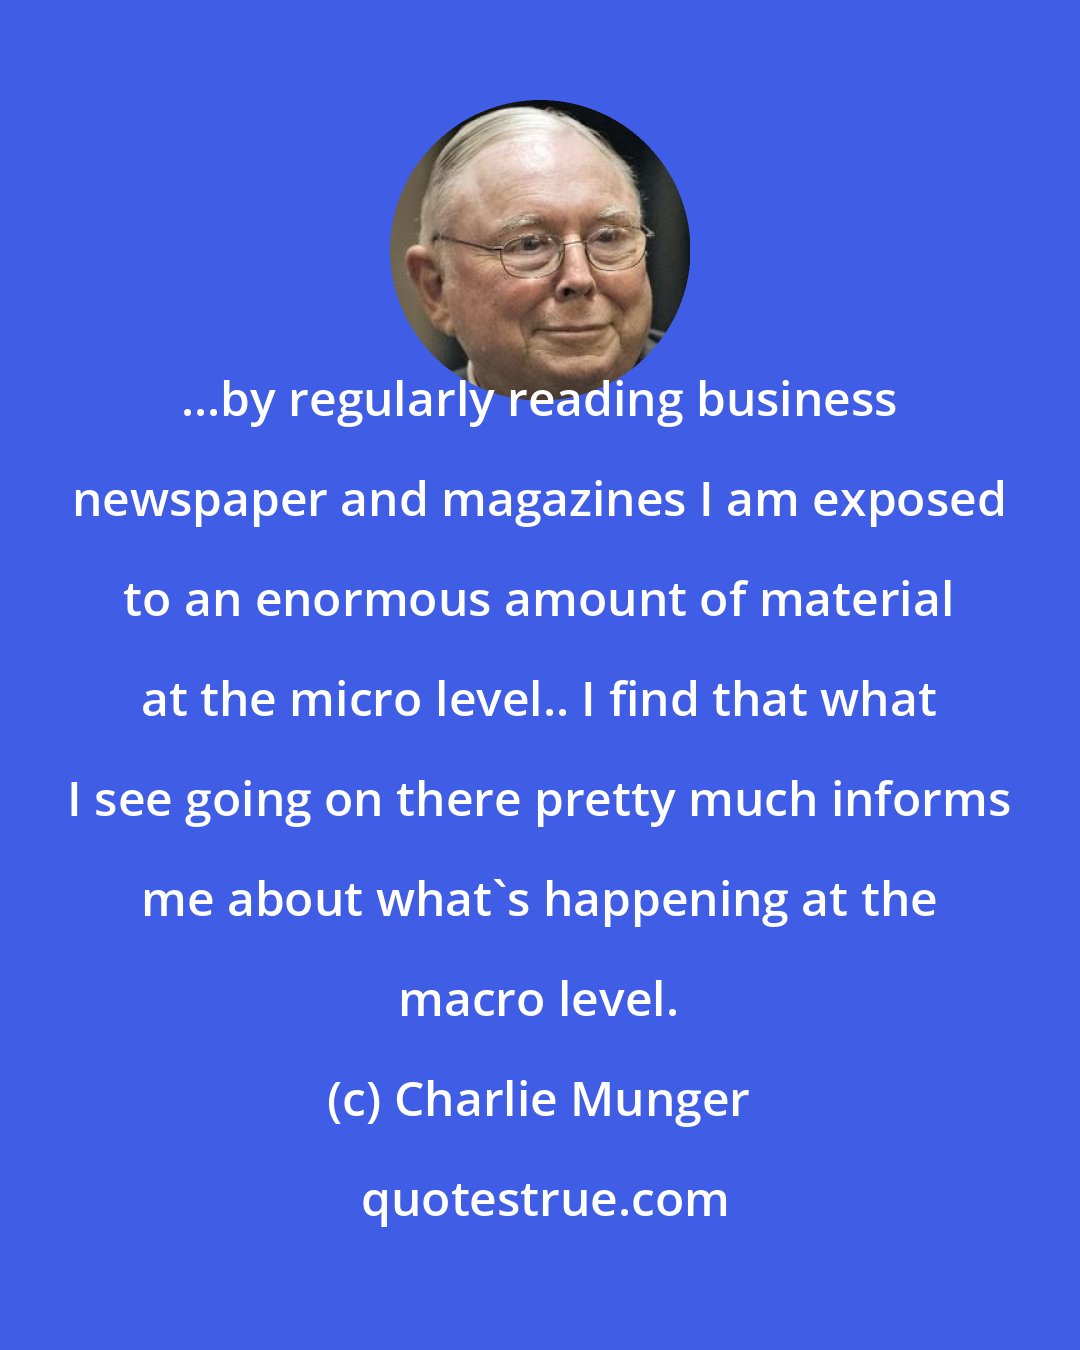 Charlie Munger: ...by regularly reading business newspaper and magazines I am exposed to an enormous amount of material at the micro level.. I find that what I see going on there pretty much informs me about what's happening at the macro level.